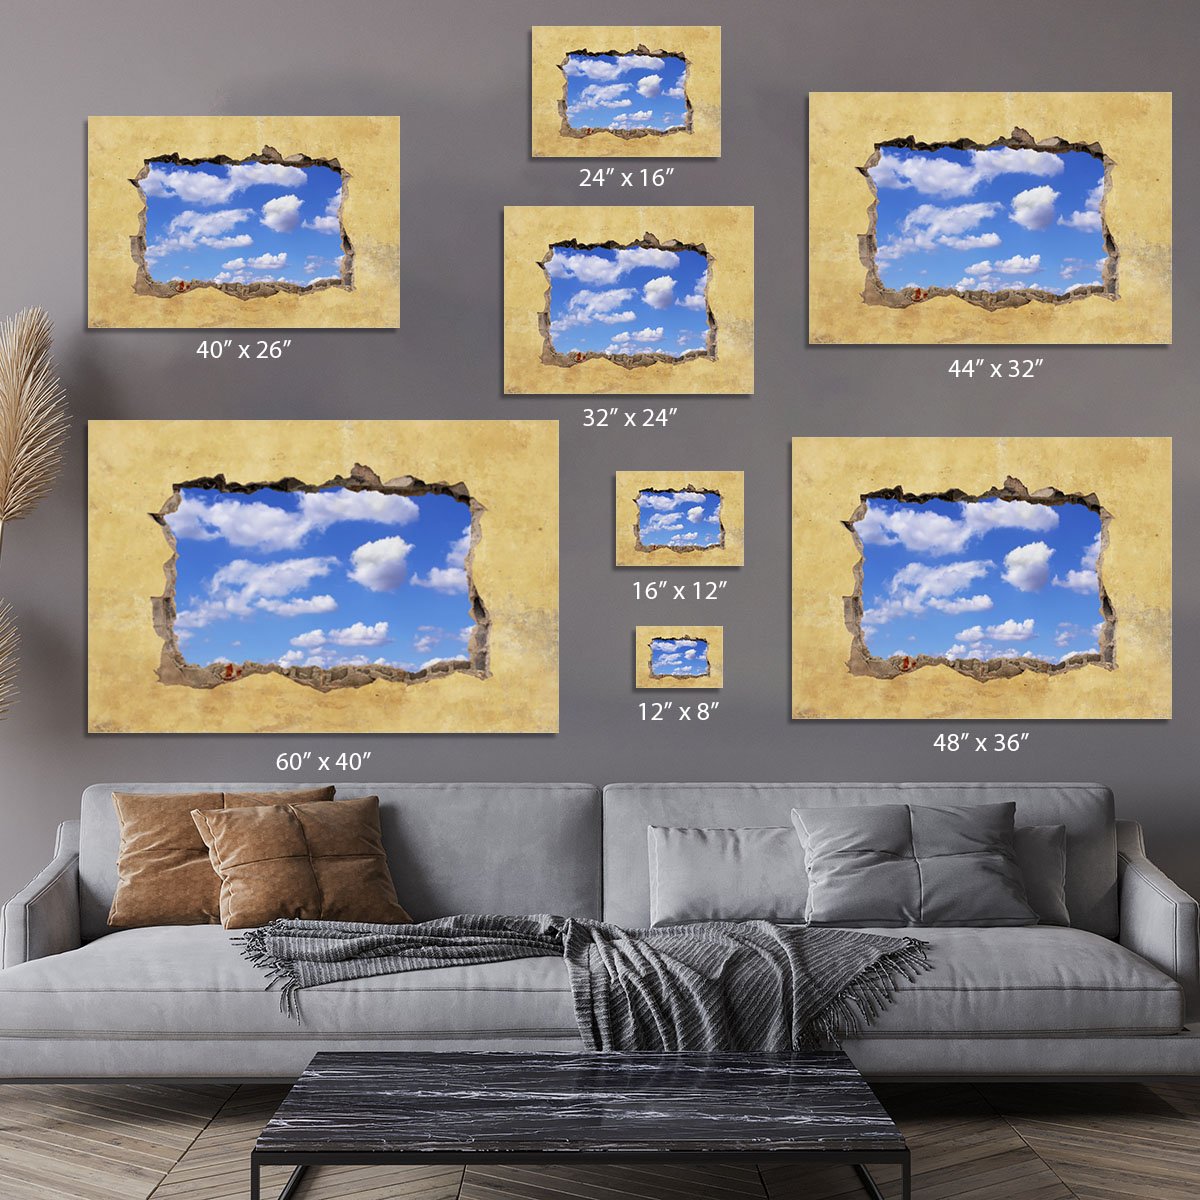 A Hole in a Wall with Blue Sky Canvas Print or Poster